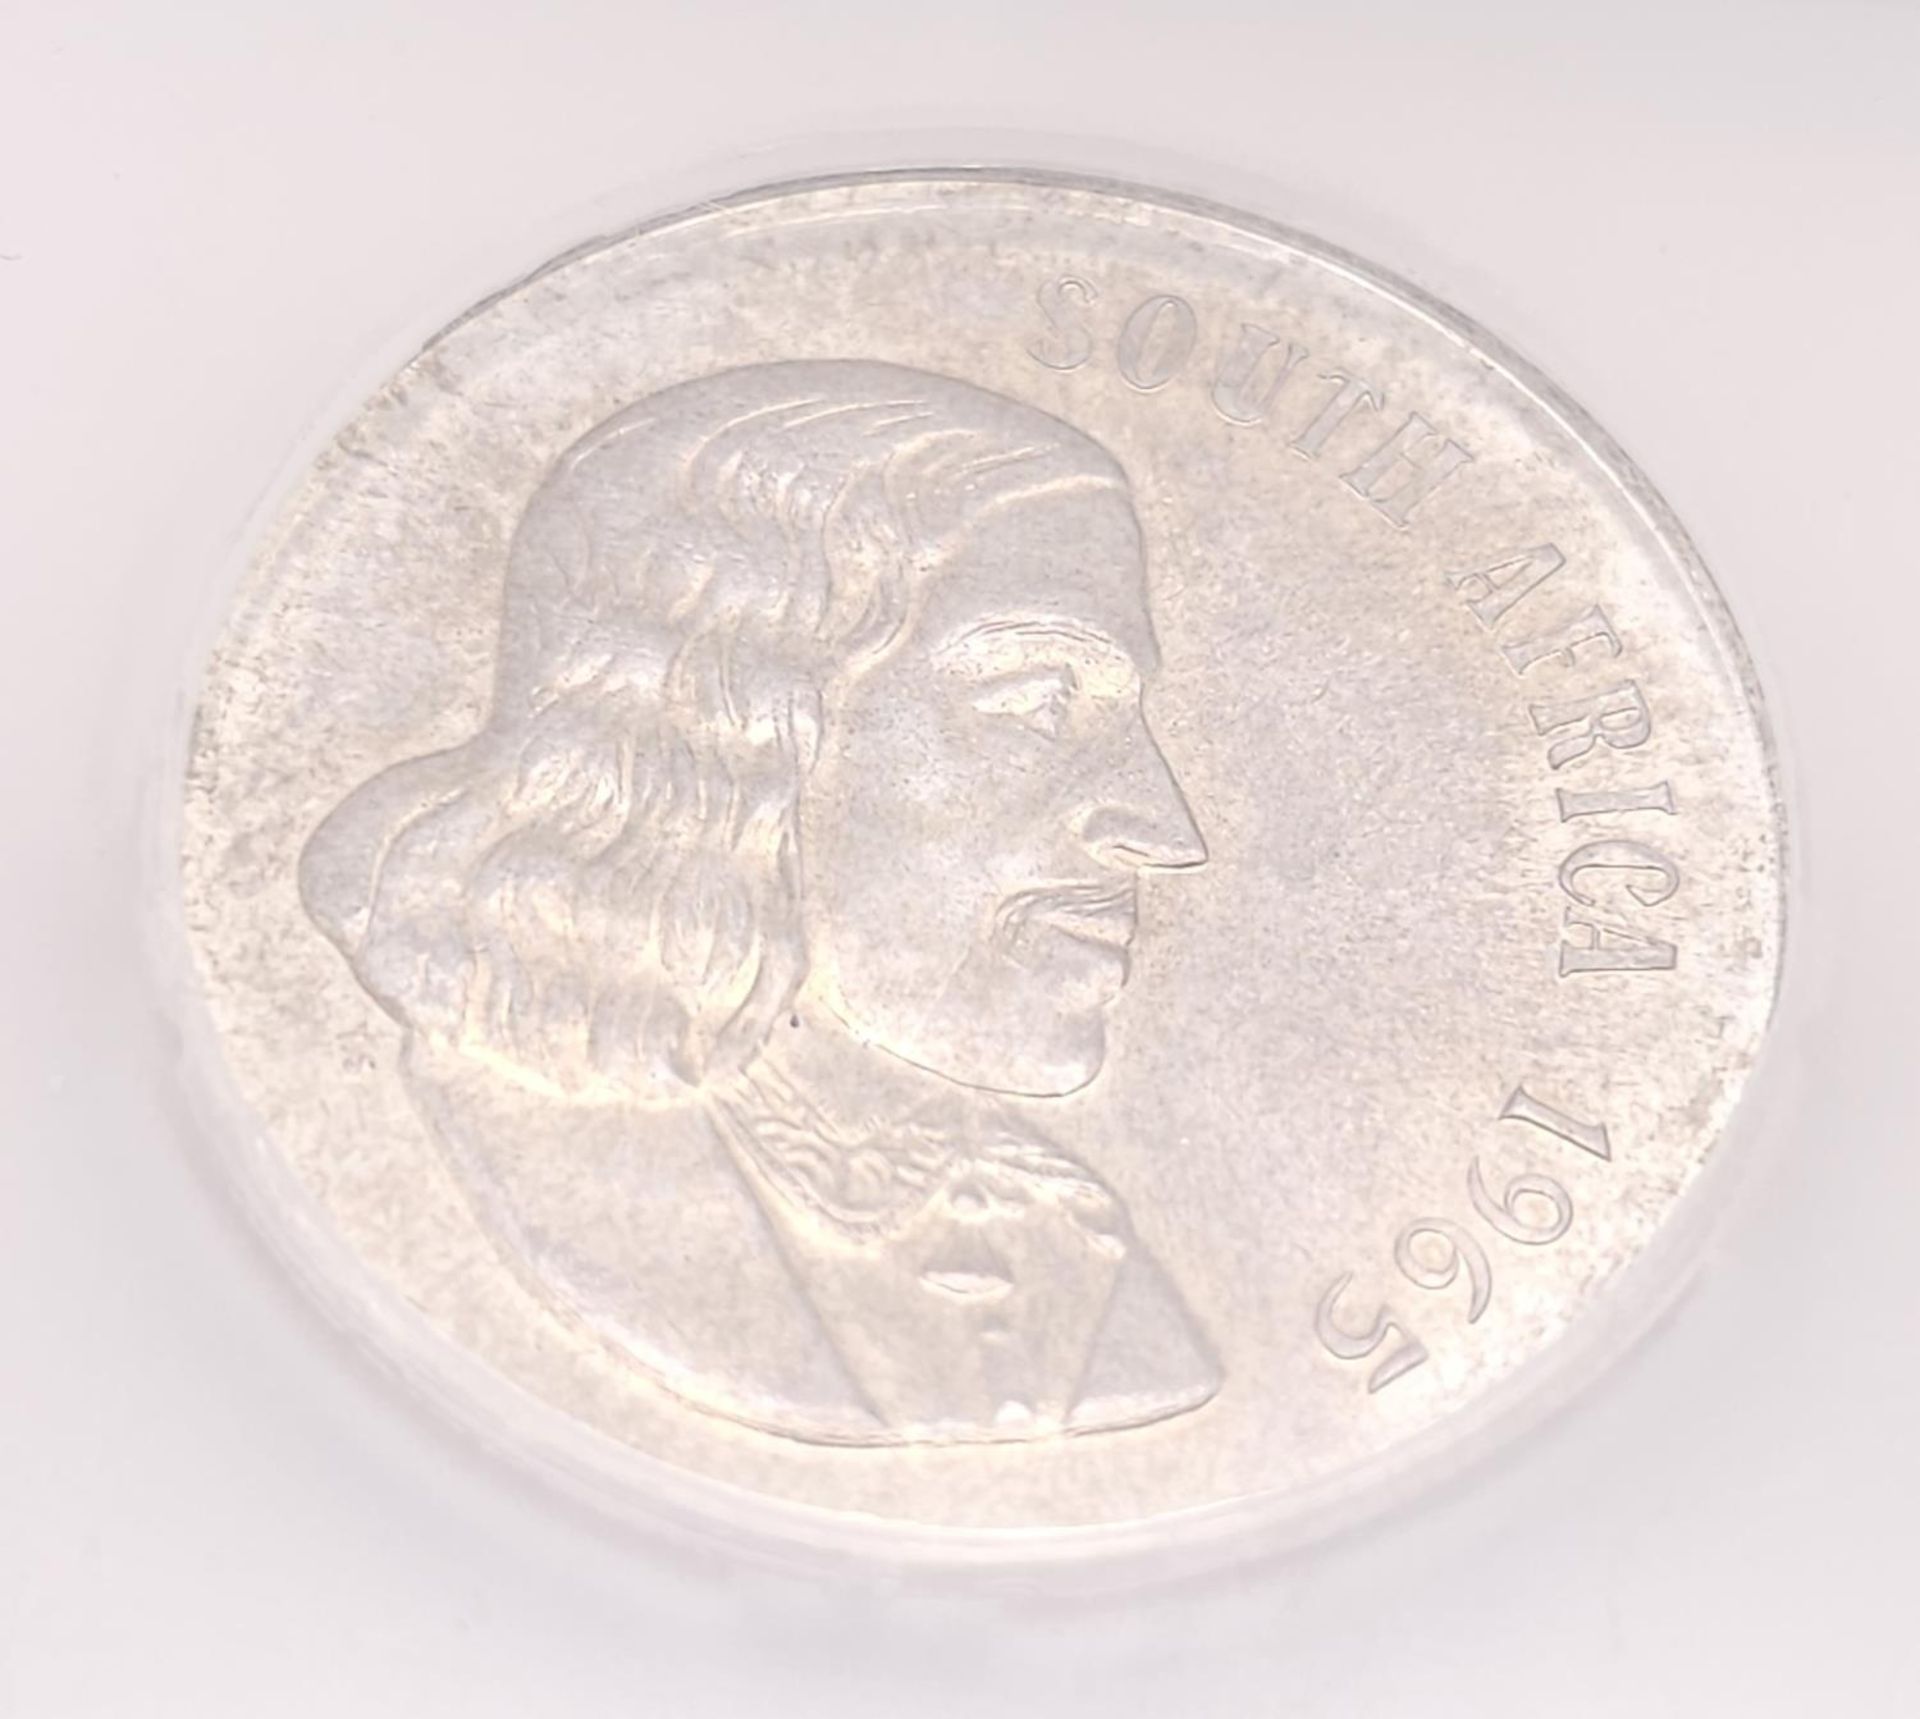 A 1965 Silver South African 1 Rand Coin. Encapsulated. - Image 2 of 3